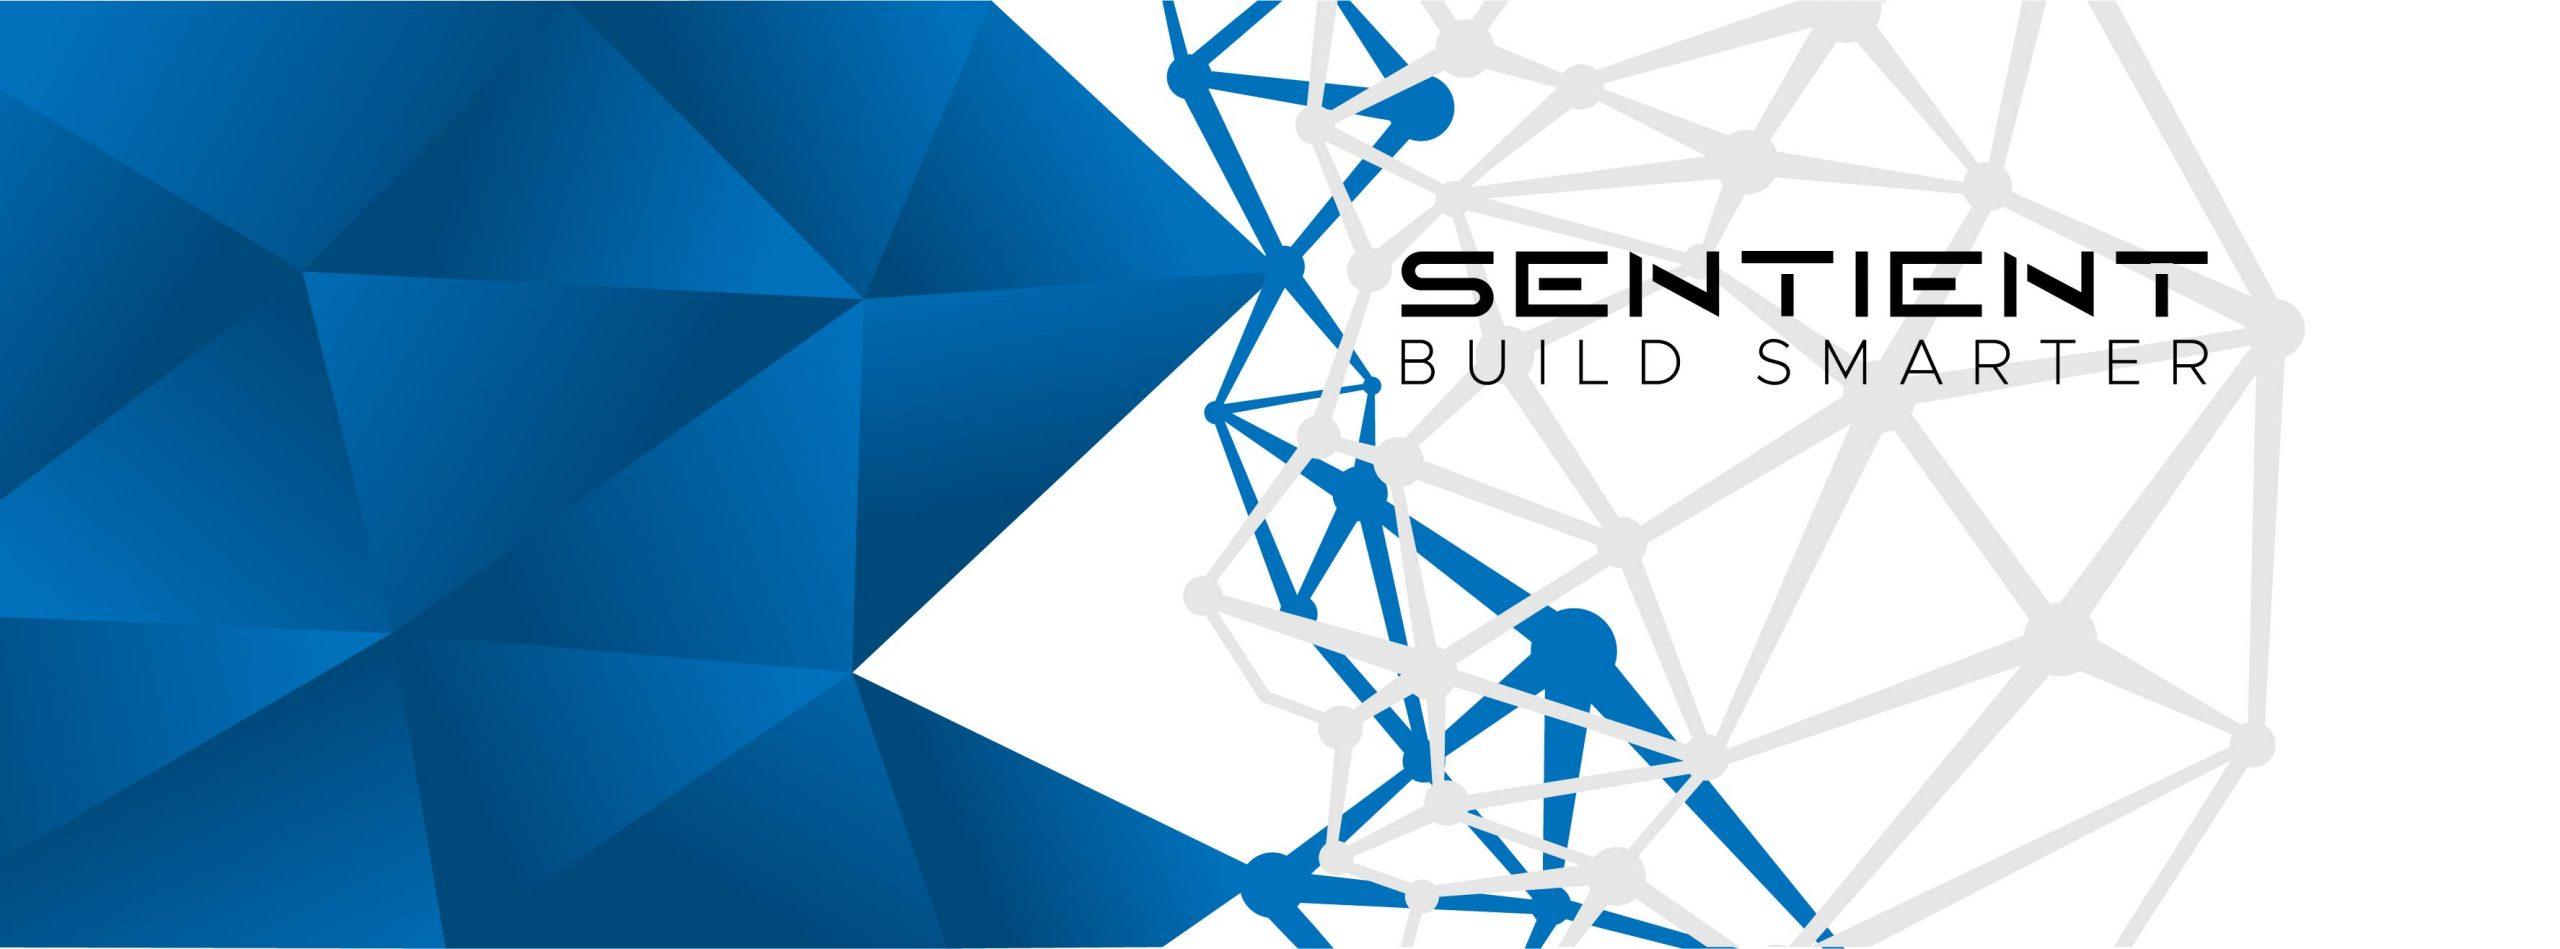 Benefits of Advanced Process Control in Semiconductor Manufacturing - SENTIENT.cloud